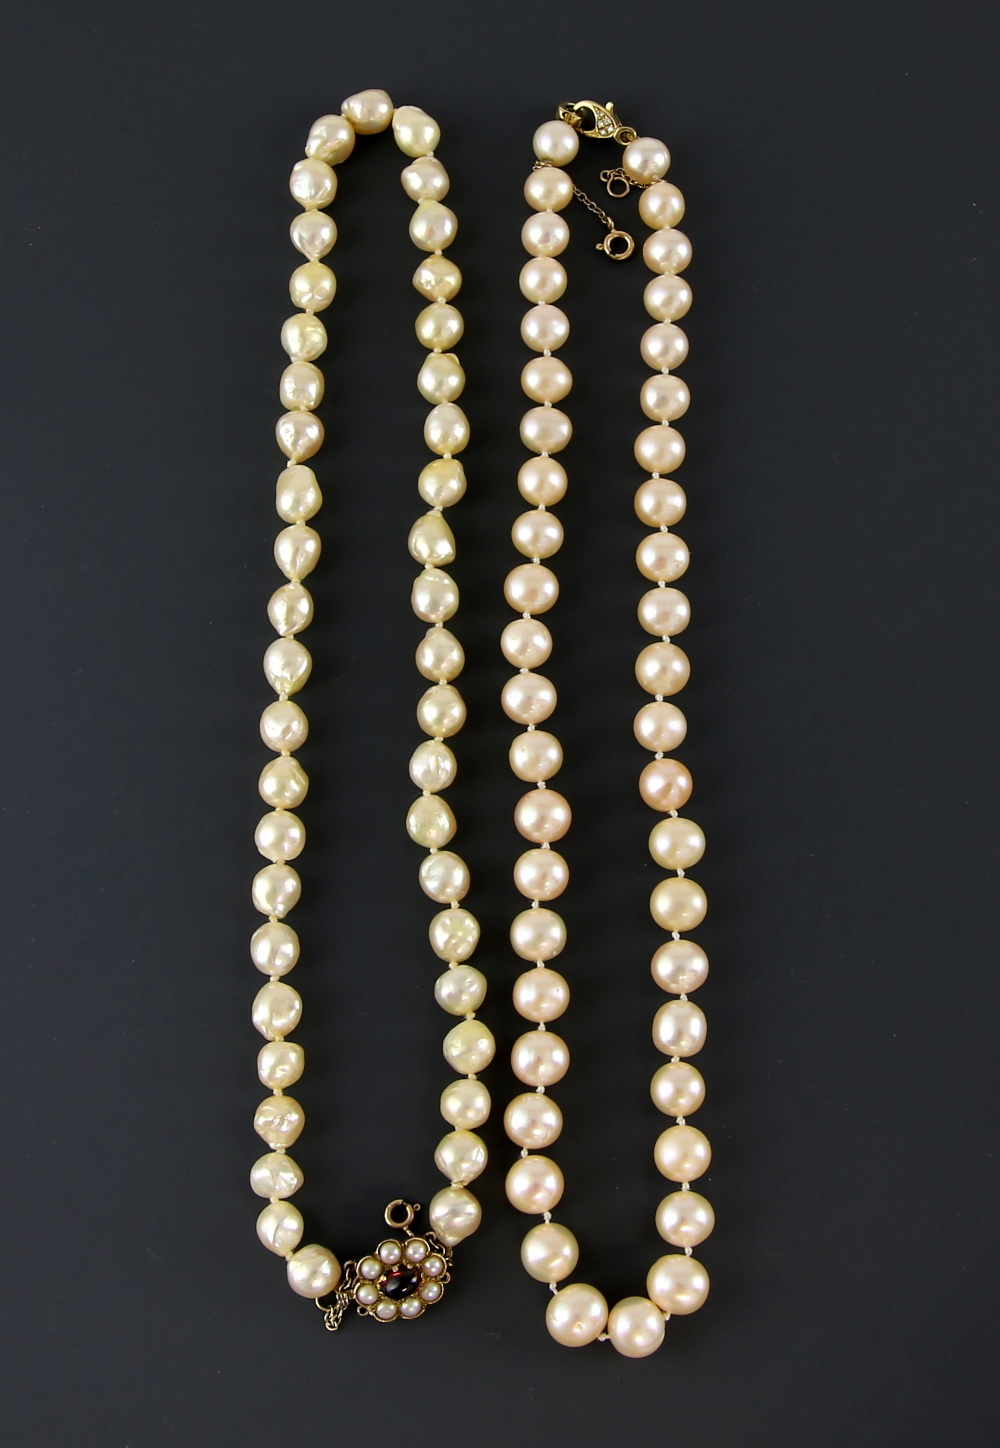 Cultured pearl necklace, with oval peach coloured pearls, measuring 9mm in diameter, strung with - Image 2 of 4